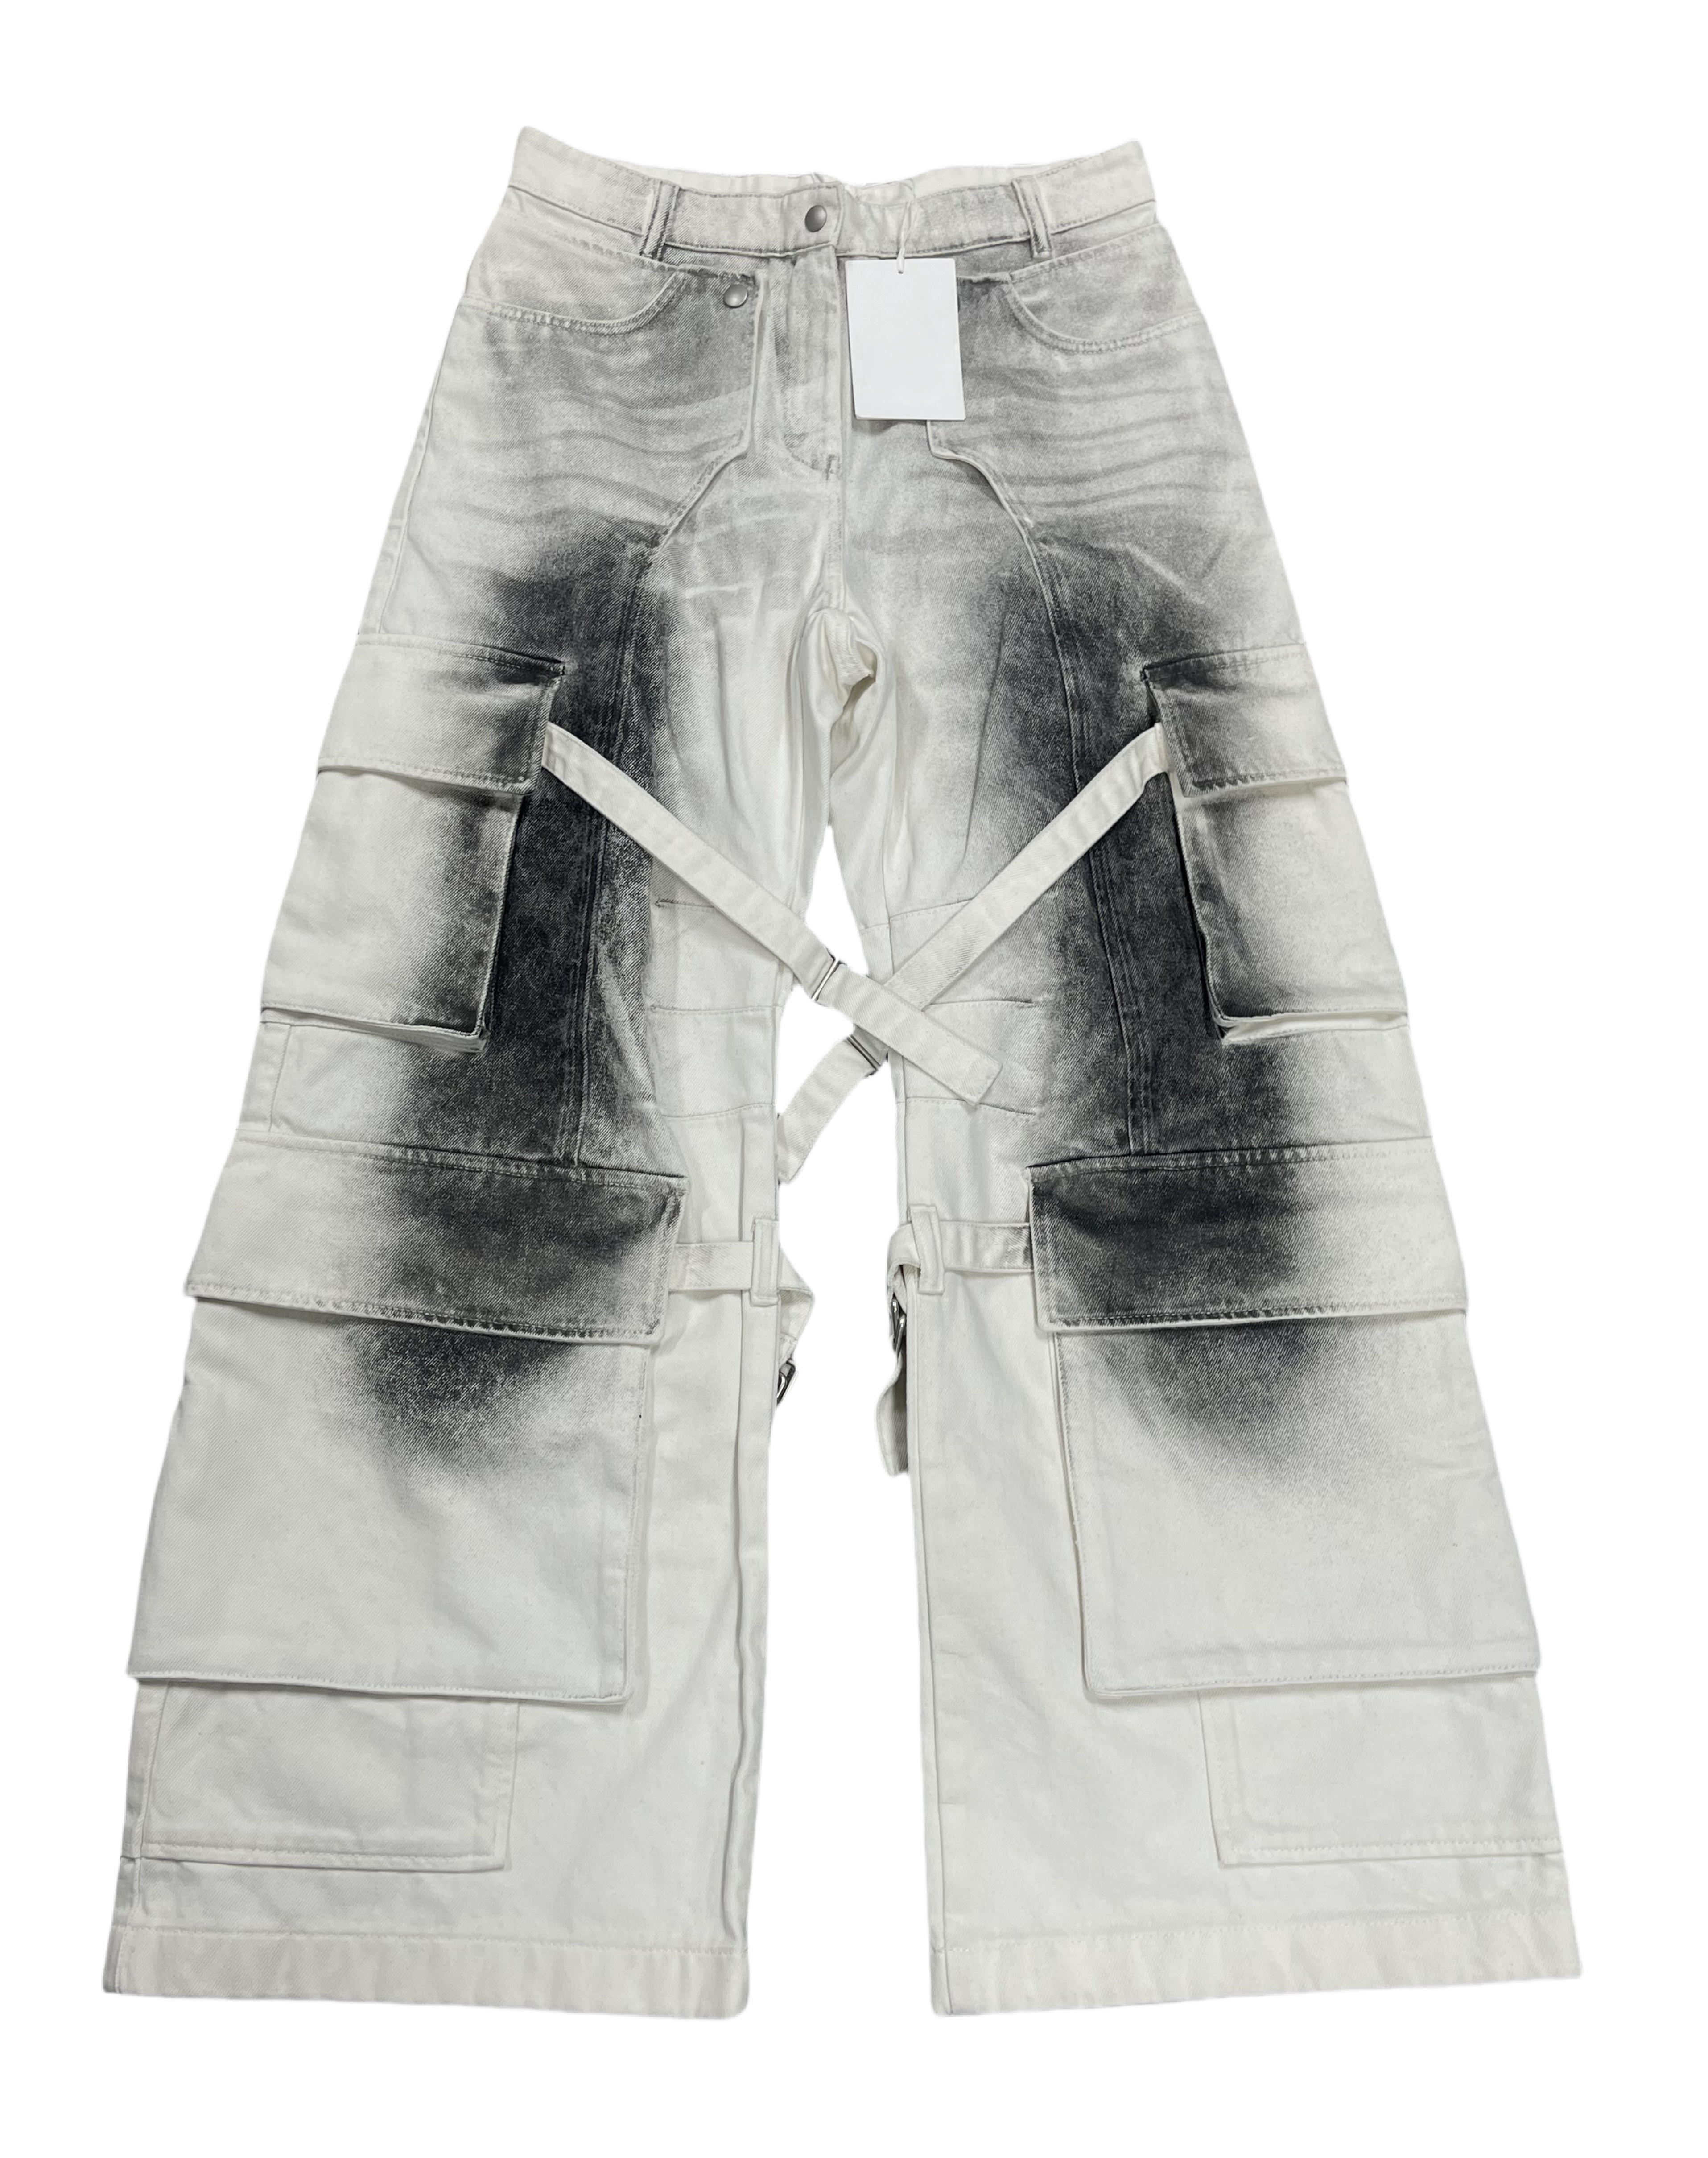 thumbnail for Daily commuter pants AC style 24SS new white ink-splashed distressed jeans cargo strappy wide-leg pants